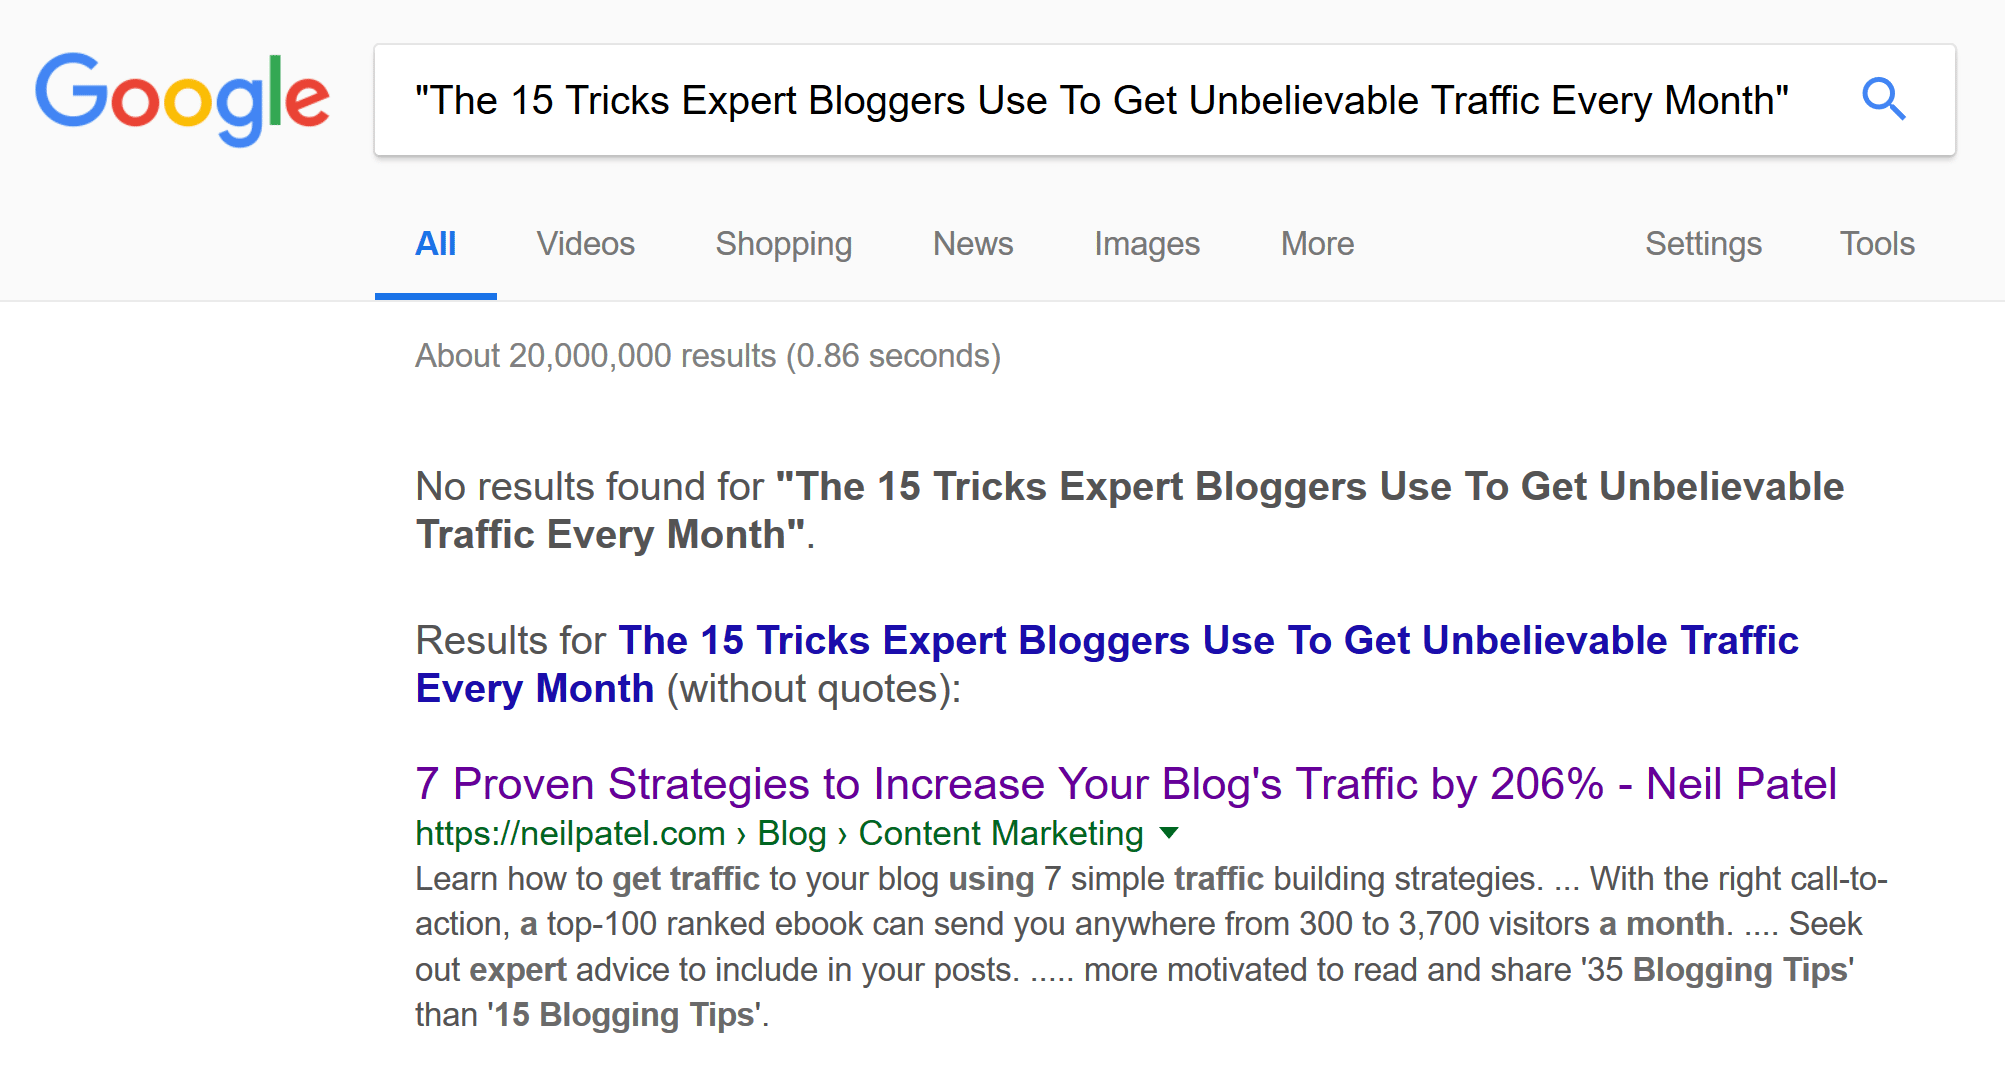 This blog title has no GOogle competition, which means it will likely get a better search ranking.